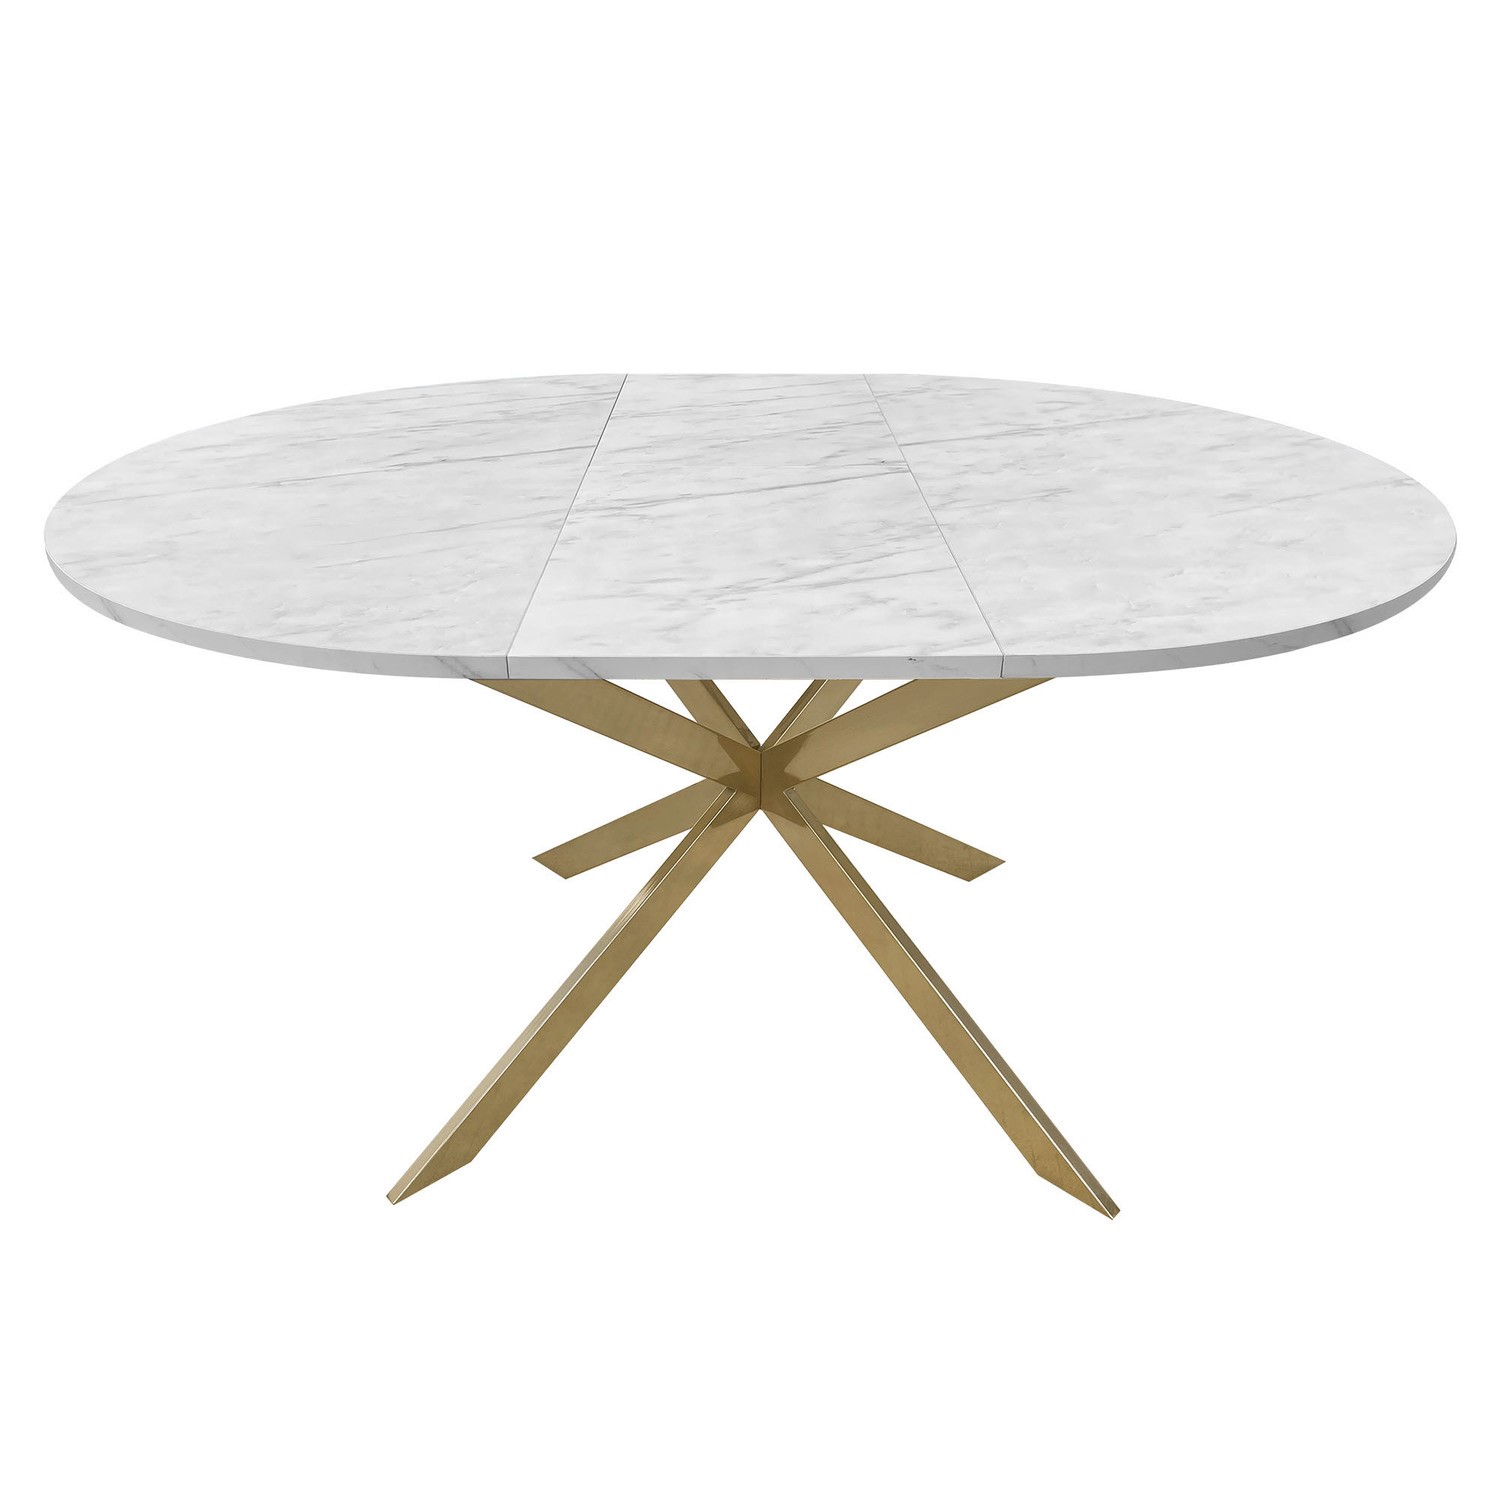 Photo of Round to oval marble effect extendable dining table in white - seats 4-6 - reine